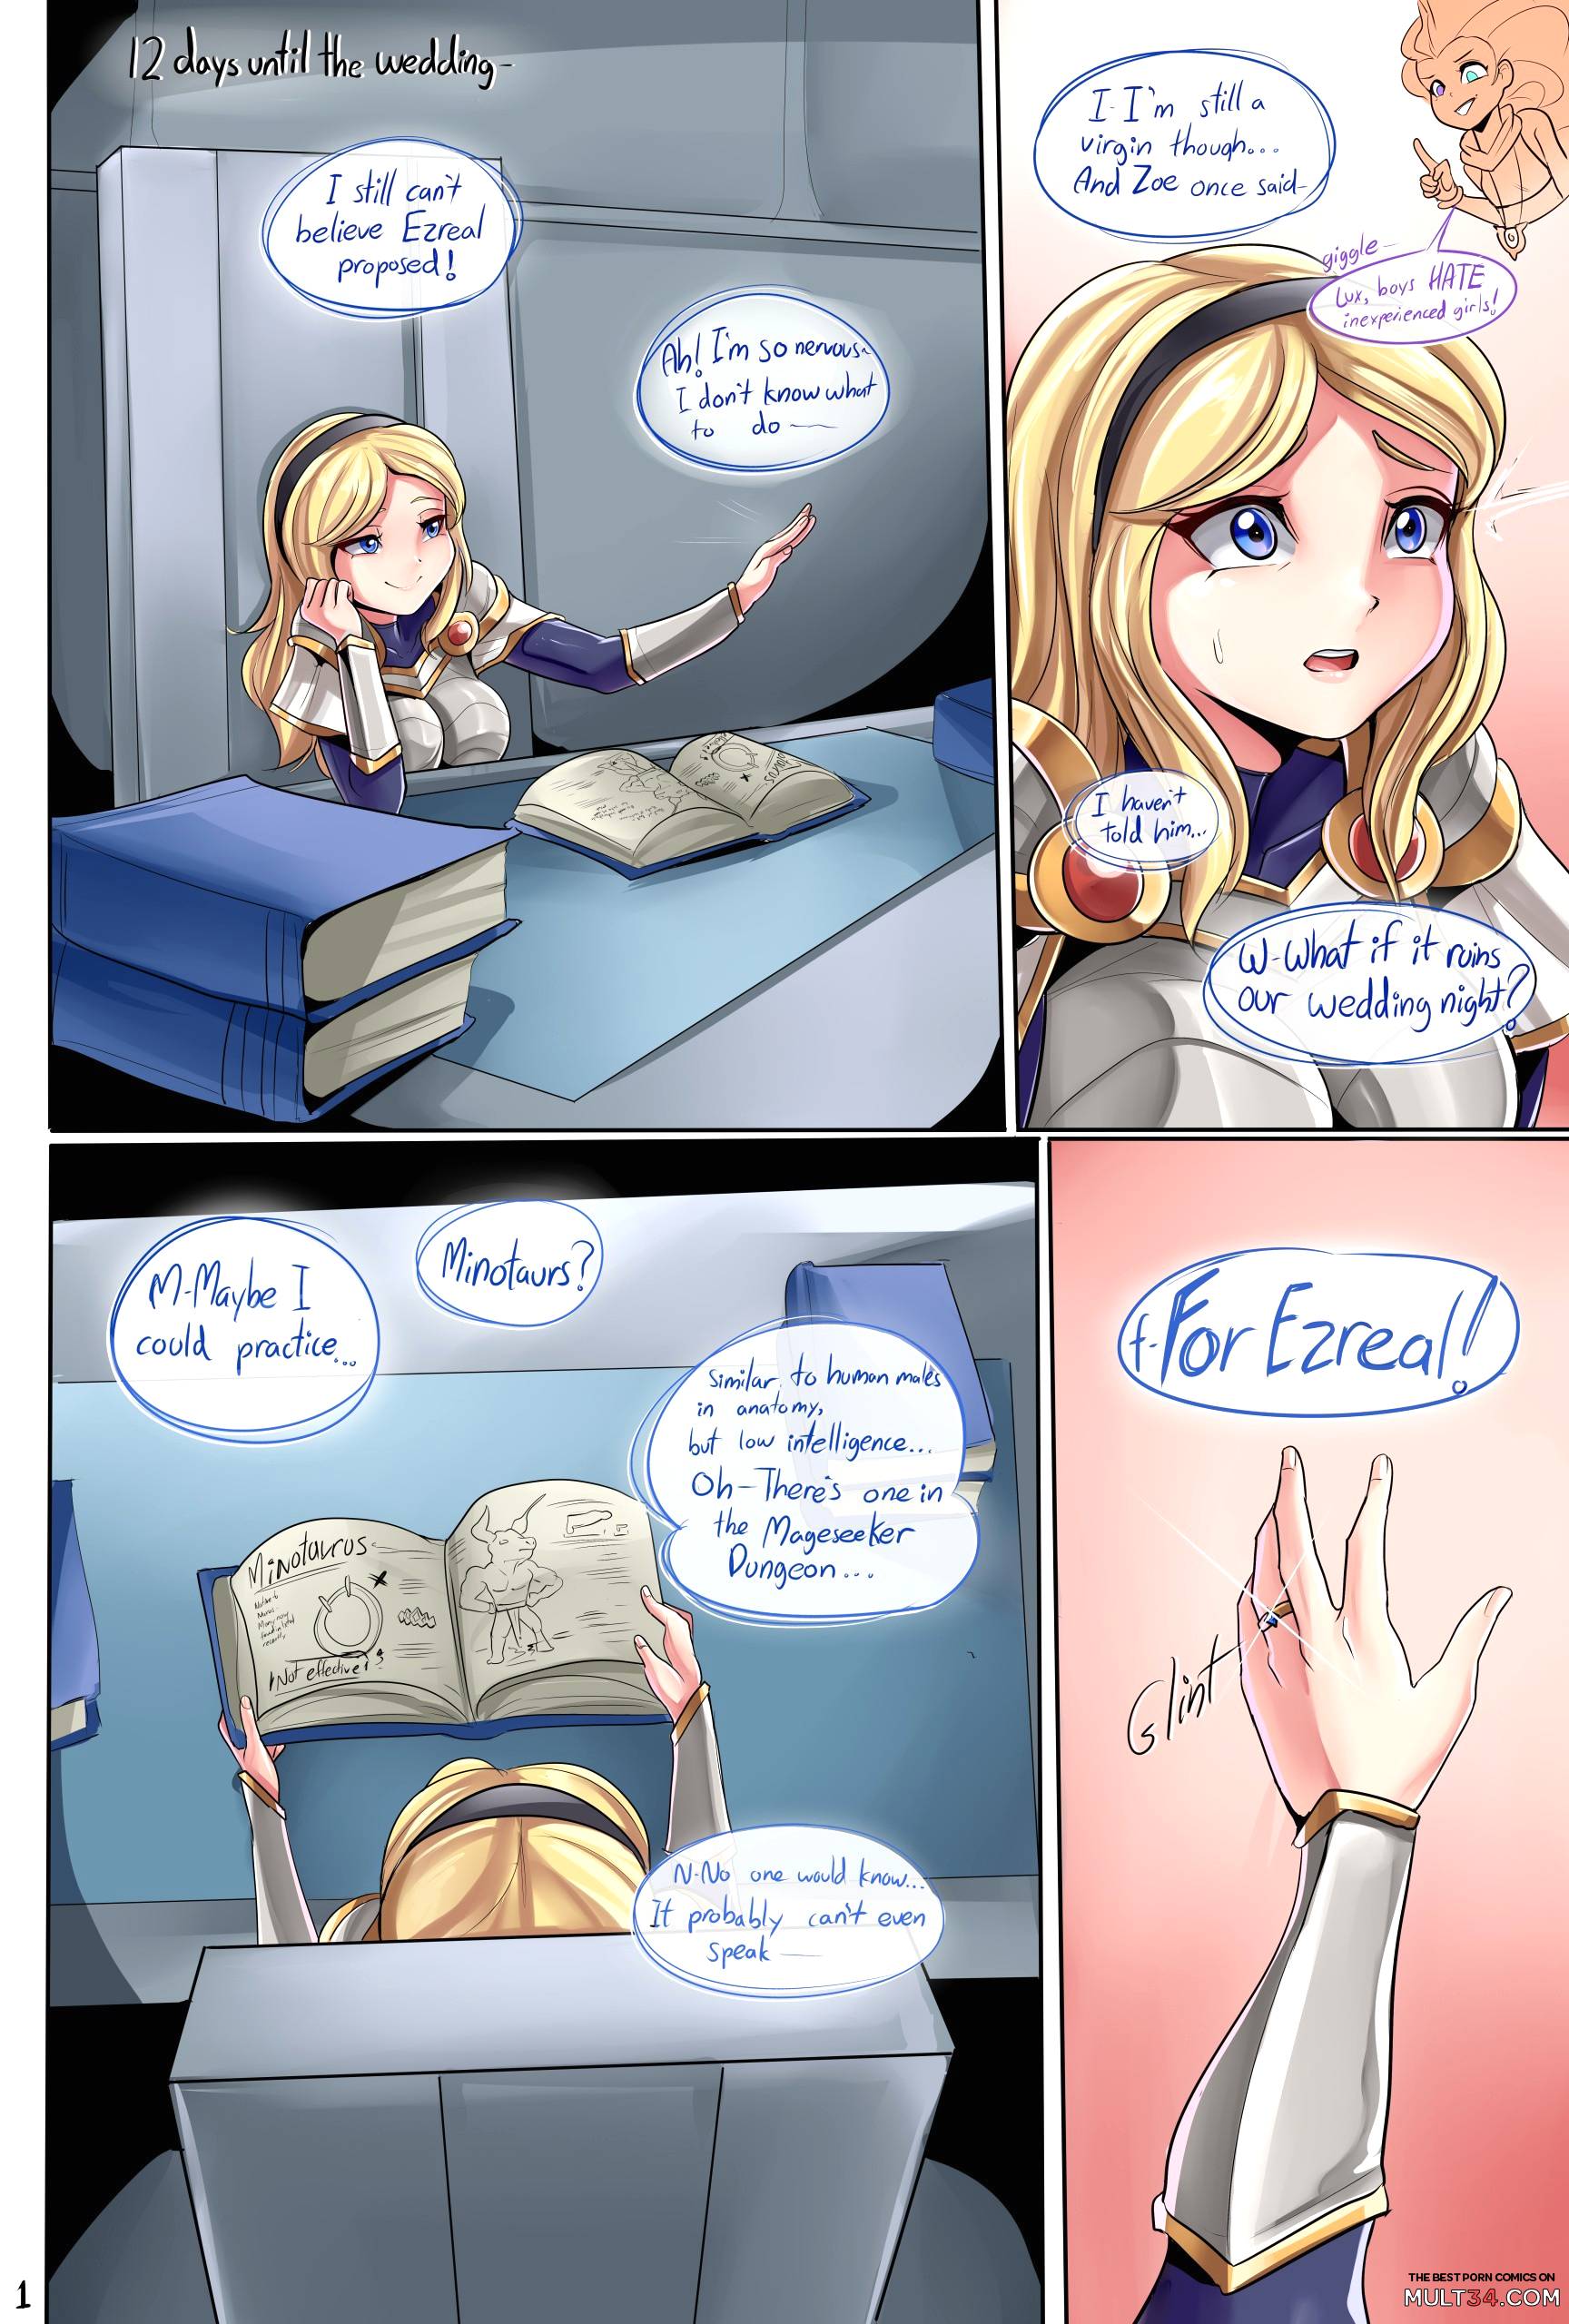 Lux and the Minotaur - True Love's Rape page 3